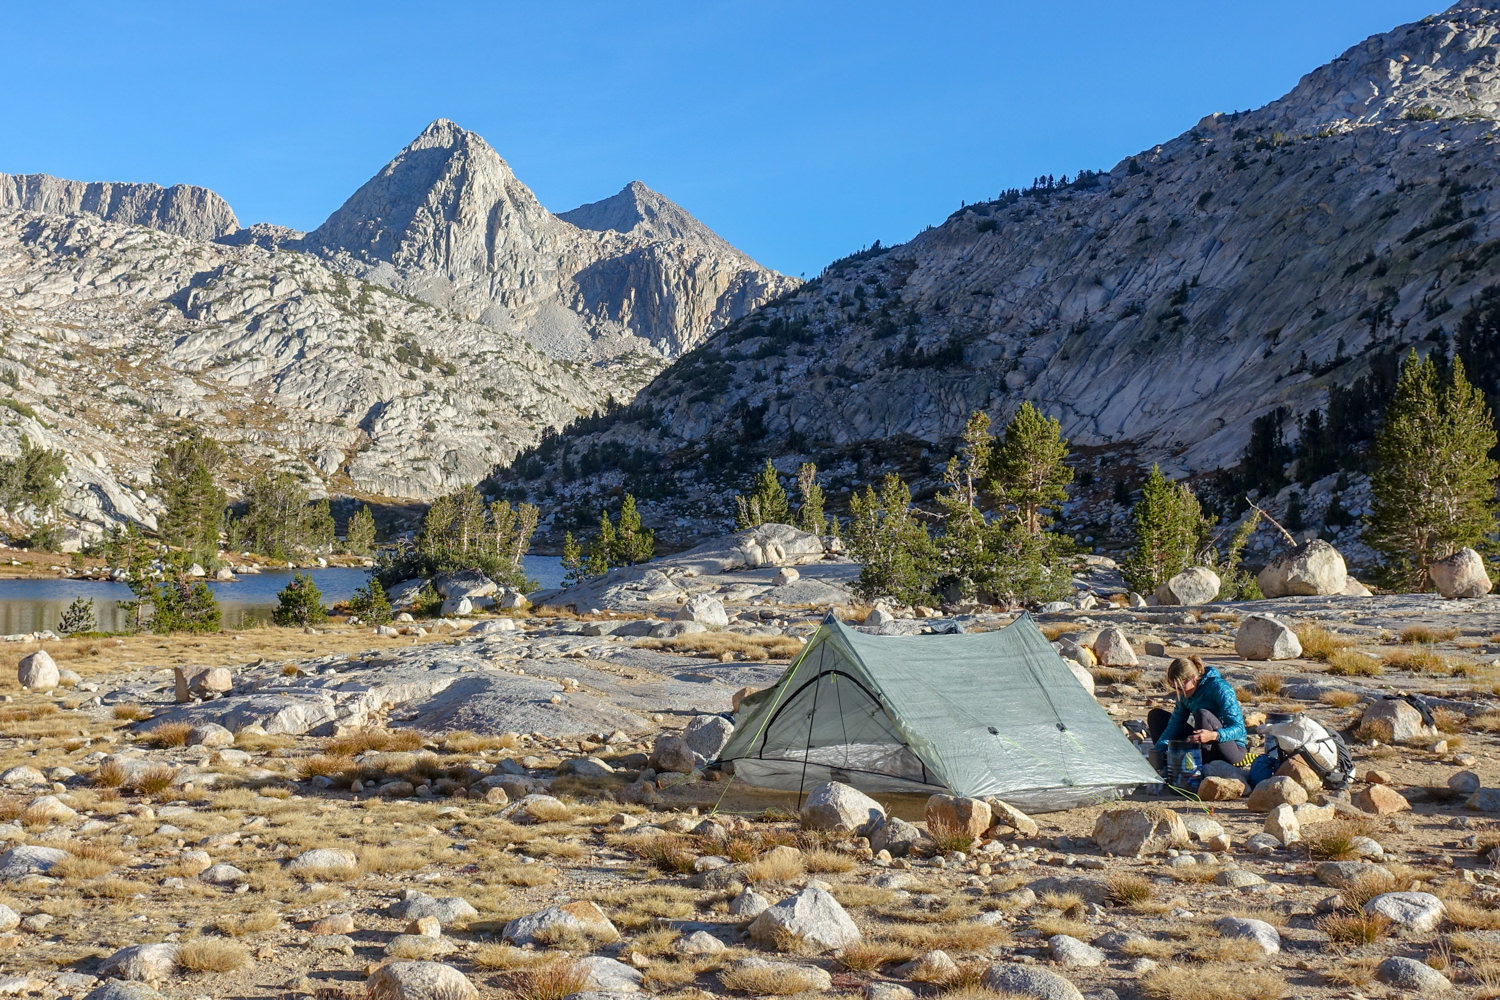 The Zpacks Triplex pitched in a rocky, high-alpine campsite on the John Muir Trail